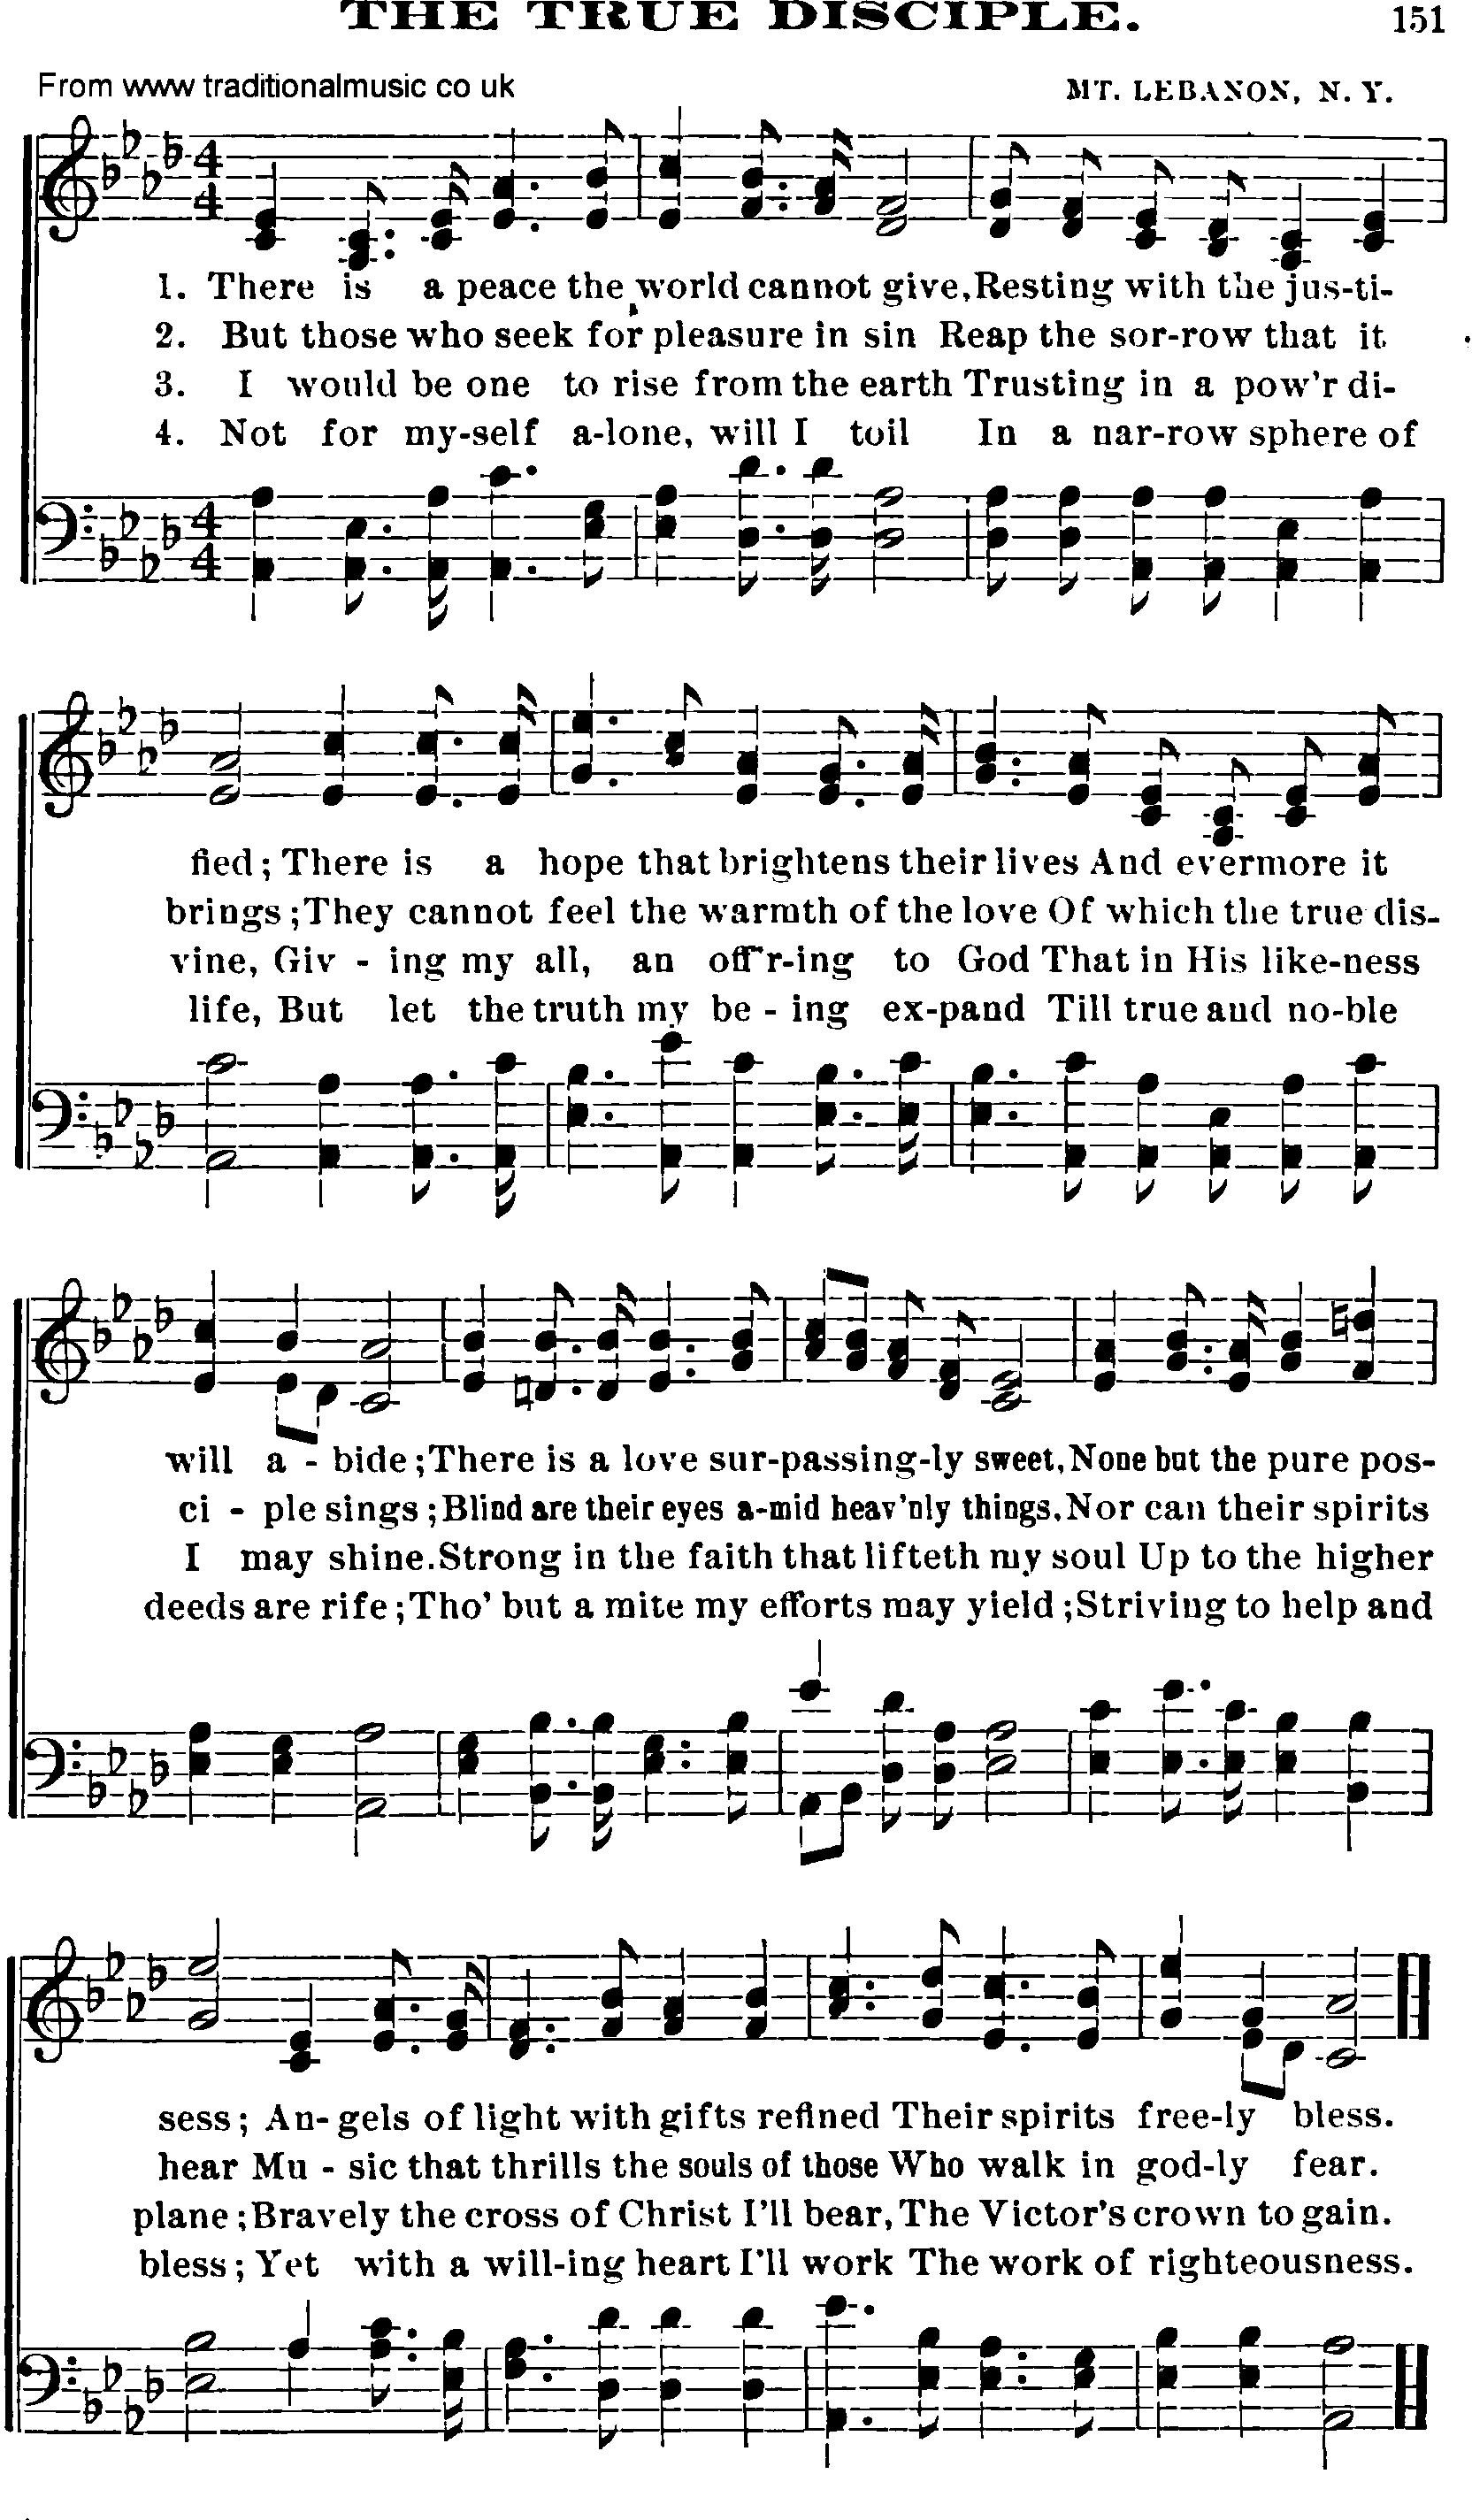 Shaker Music collection, Hymn: the true disciple, sheetmusic and PDF